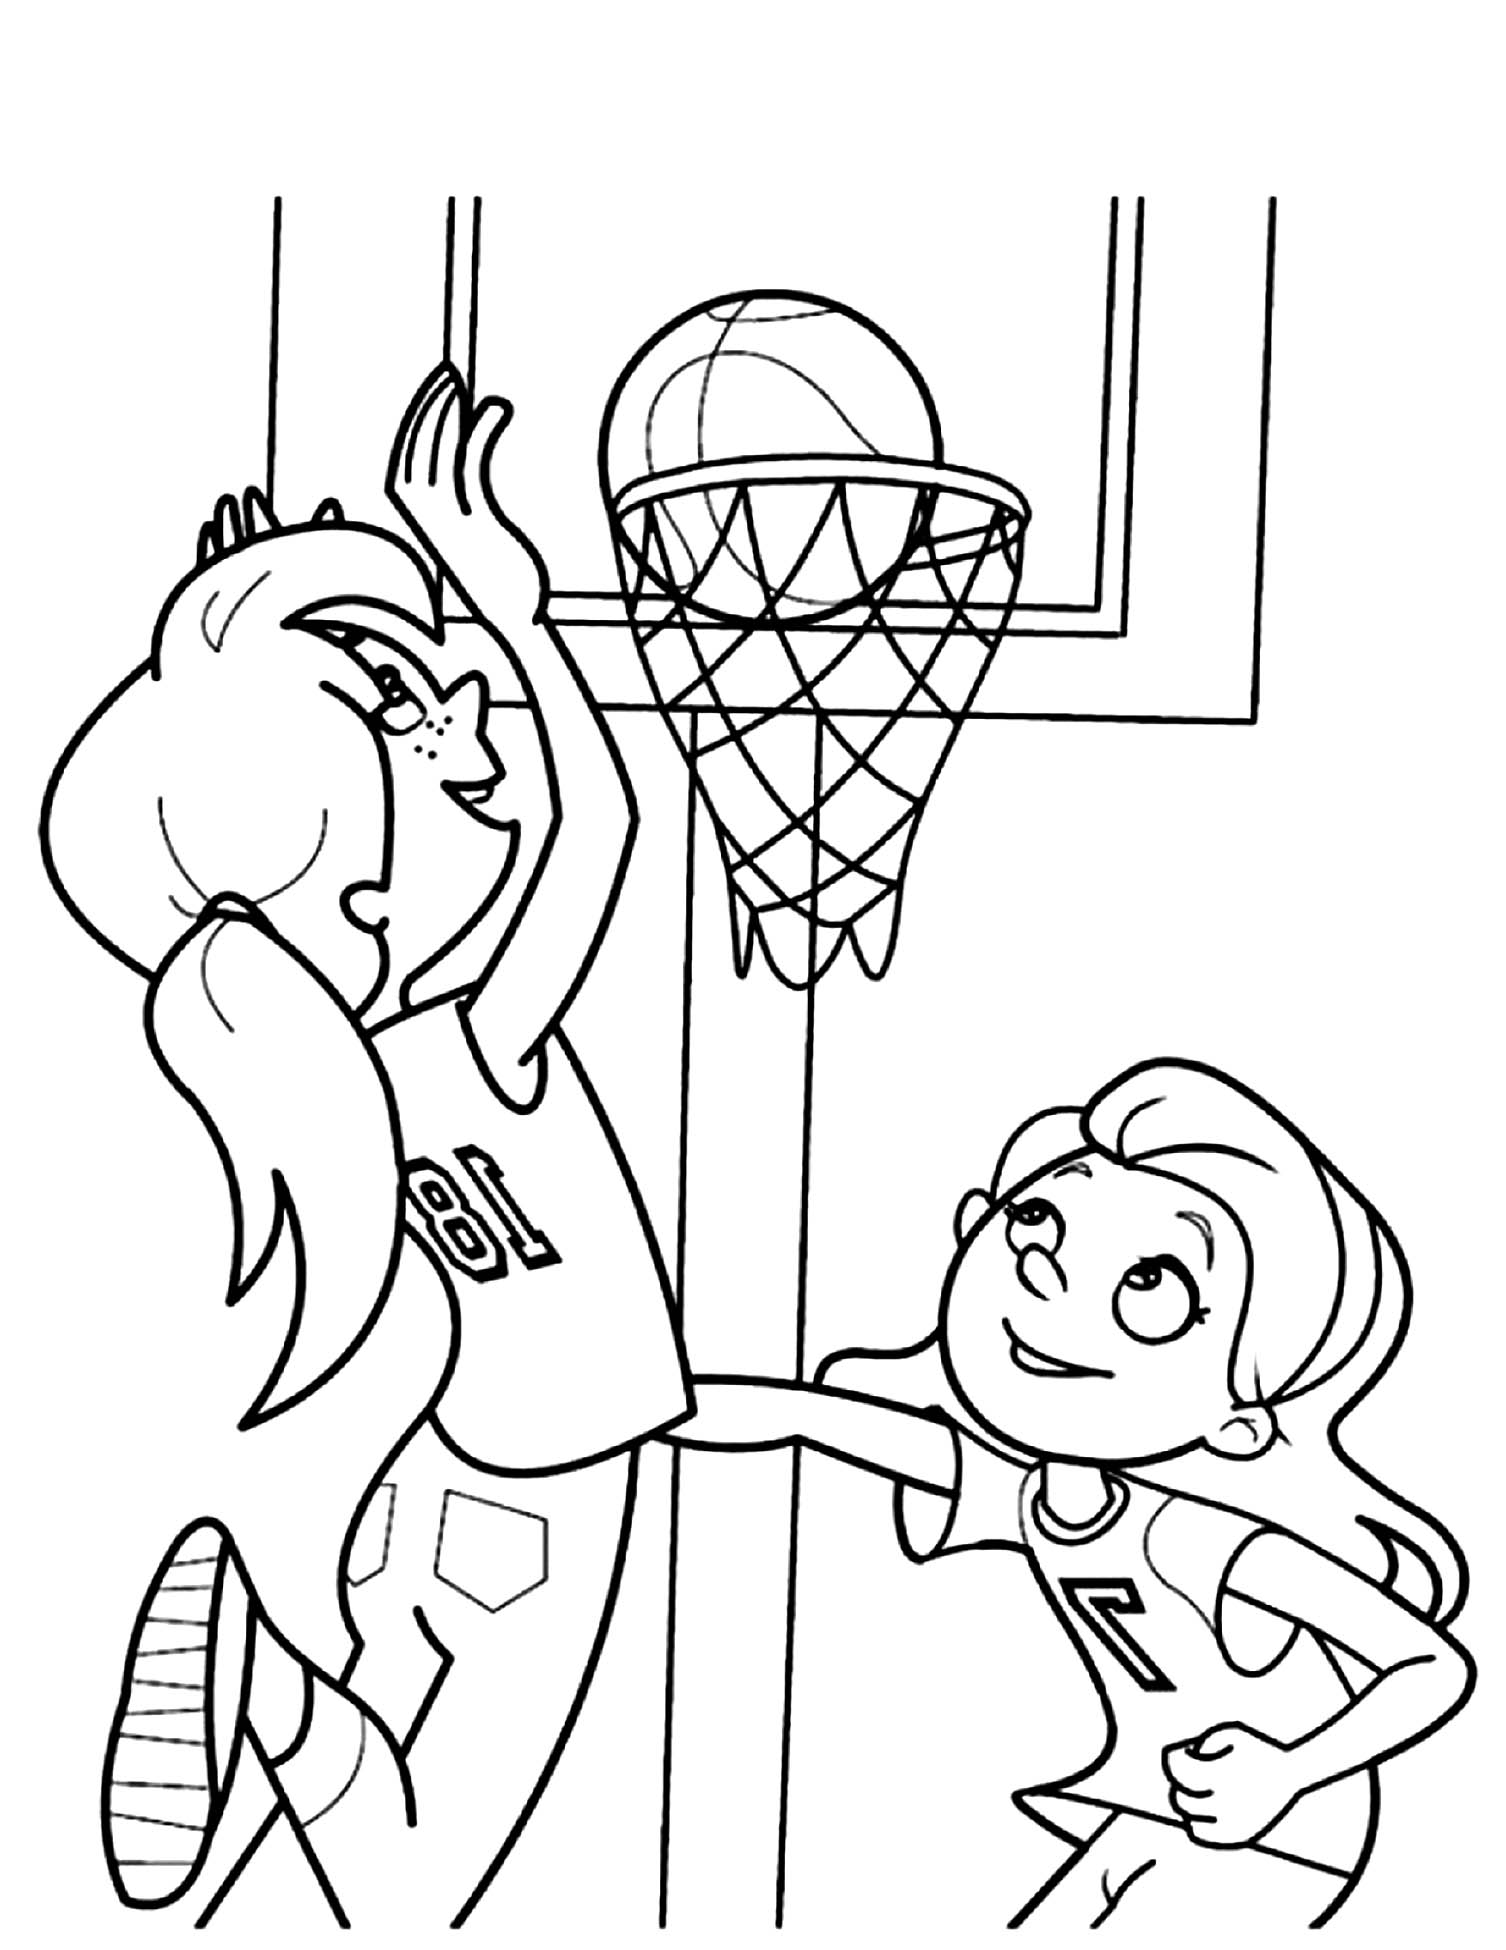 Girls Playing Basketball Coloring Page - Basketball Kids Coloring Pages